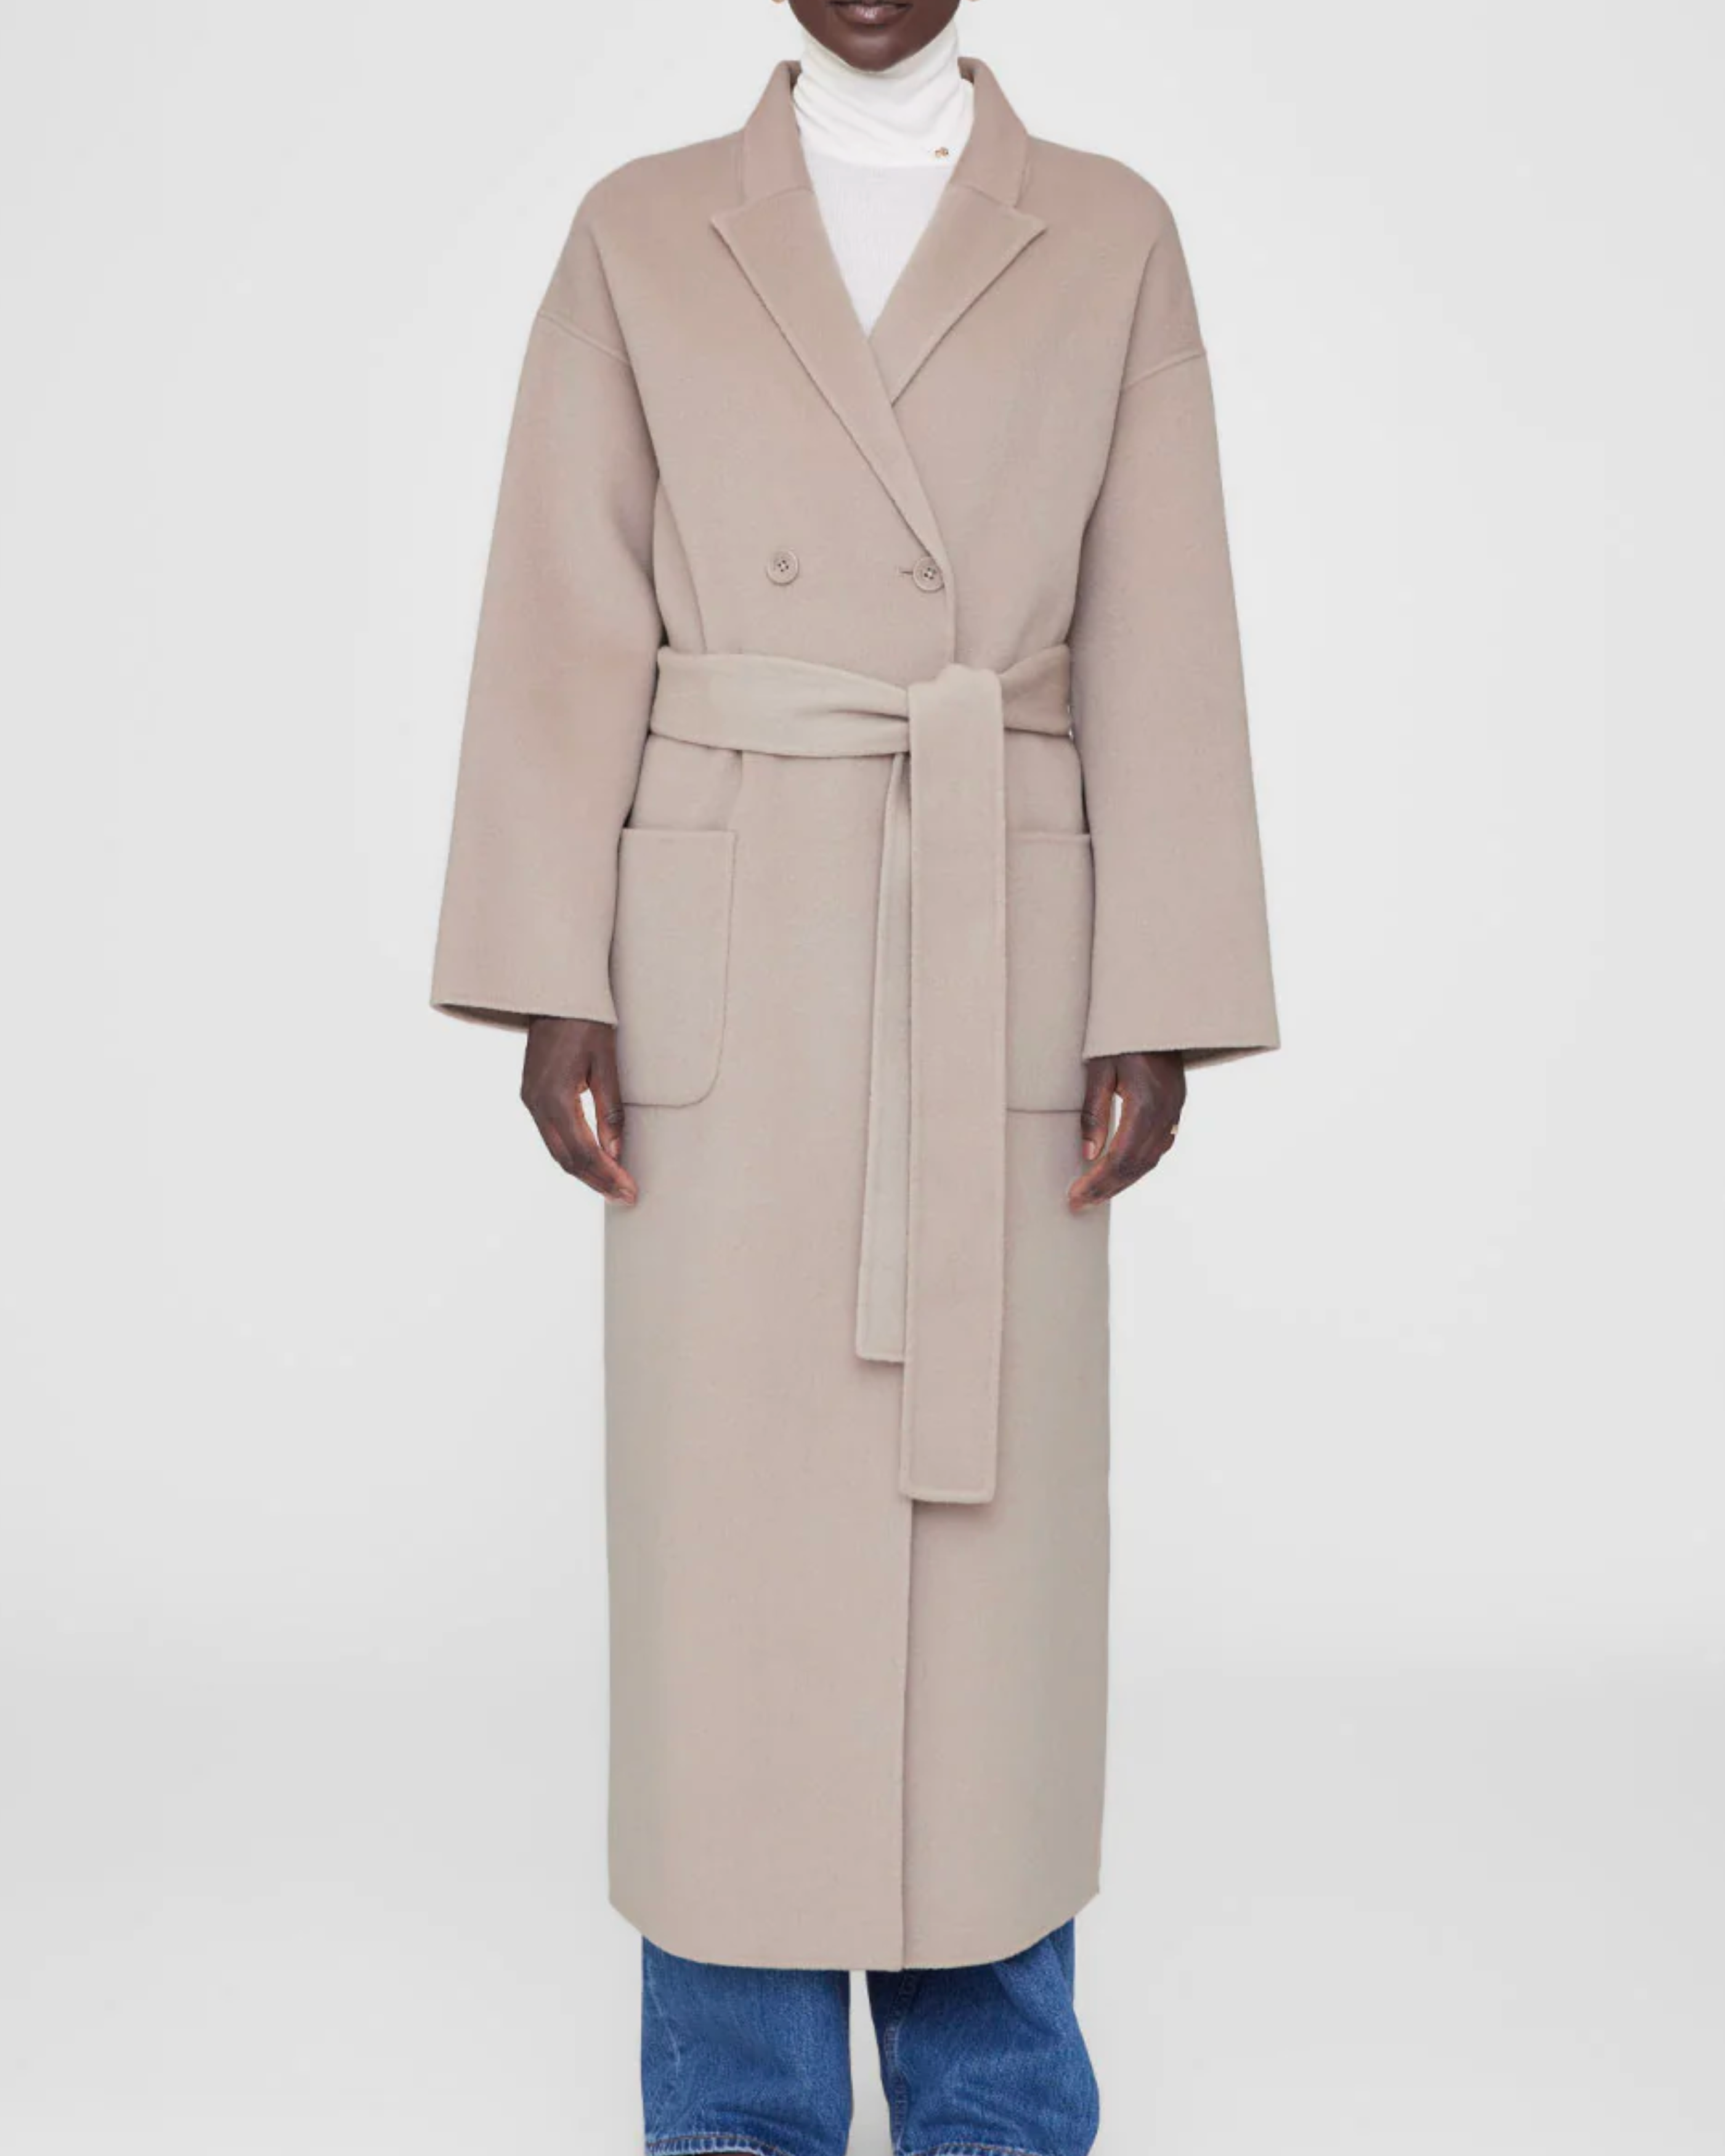 Anine Bing Dylan Maxi Coat in Taupe Cashmere